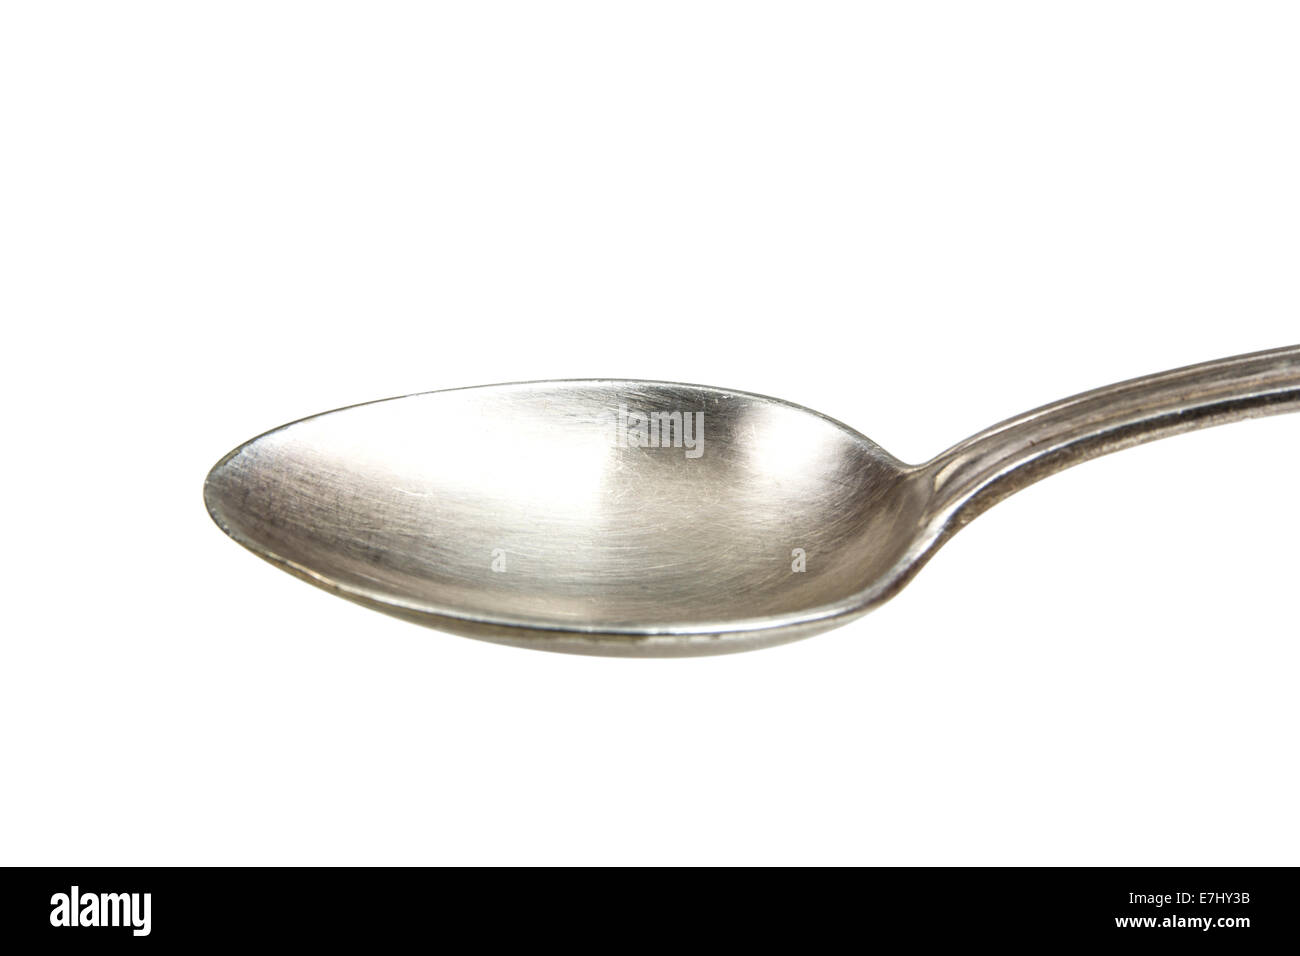 A silver spoon against a white background. Clipping path included for easy extraction. Stock Photo